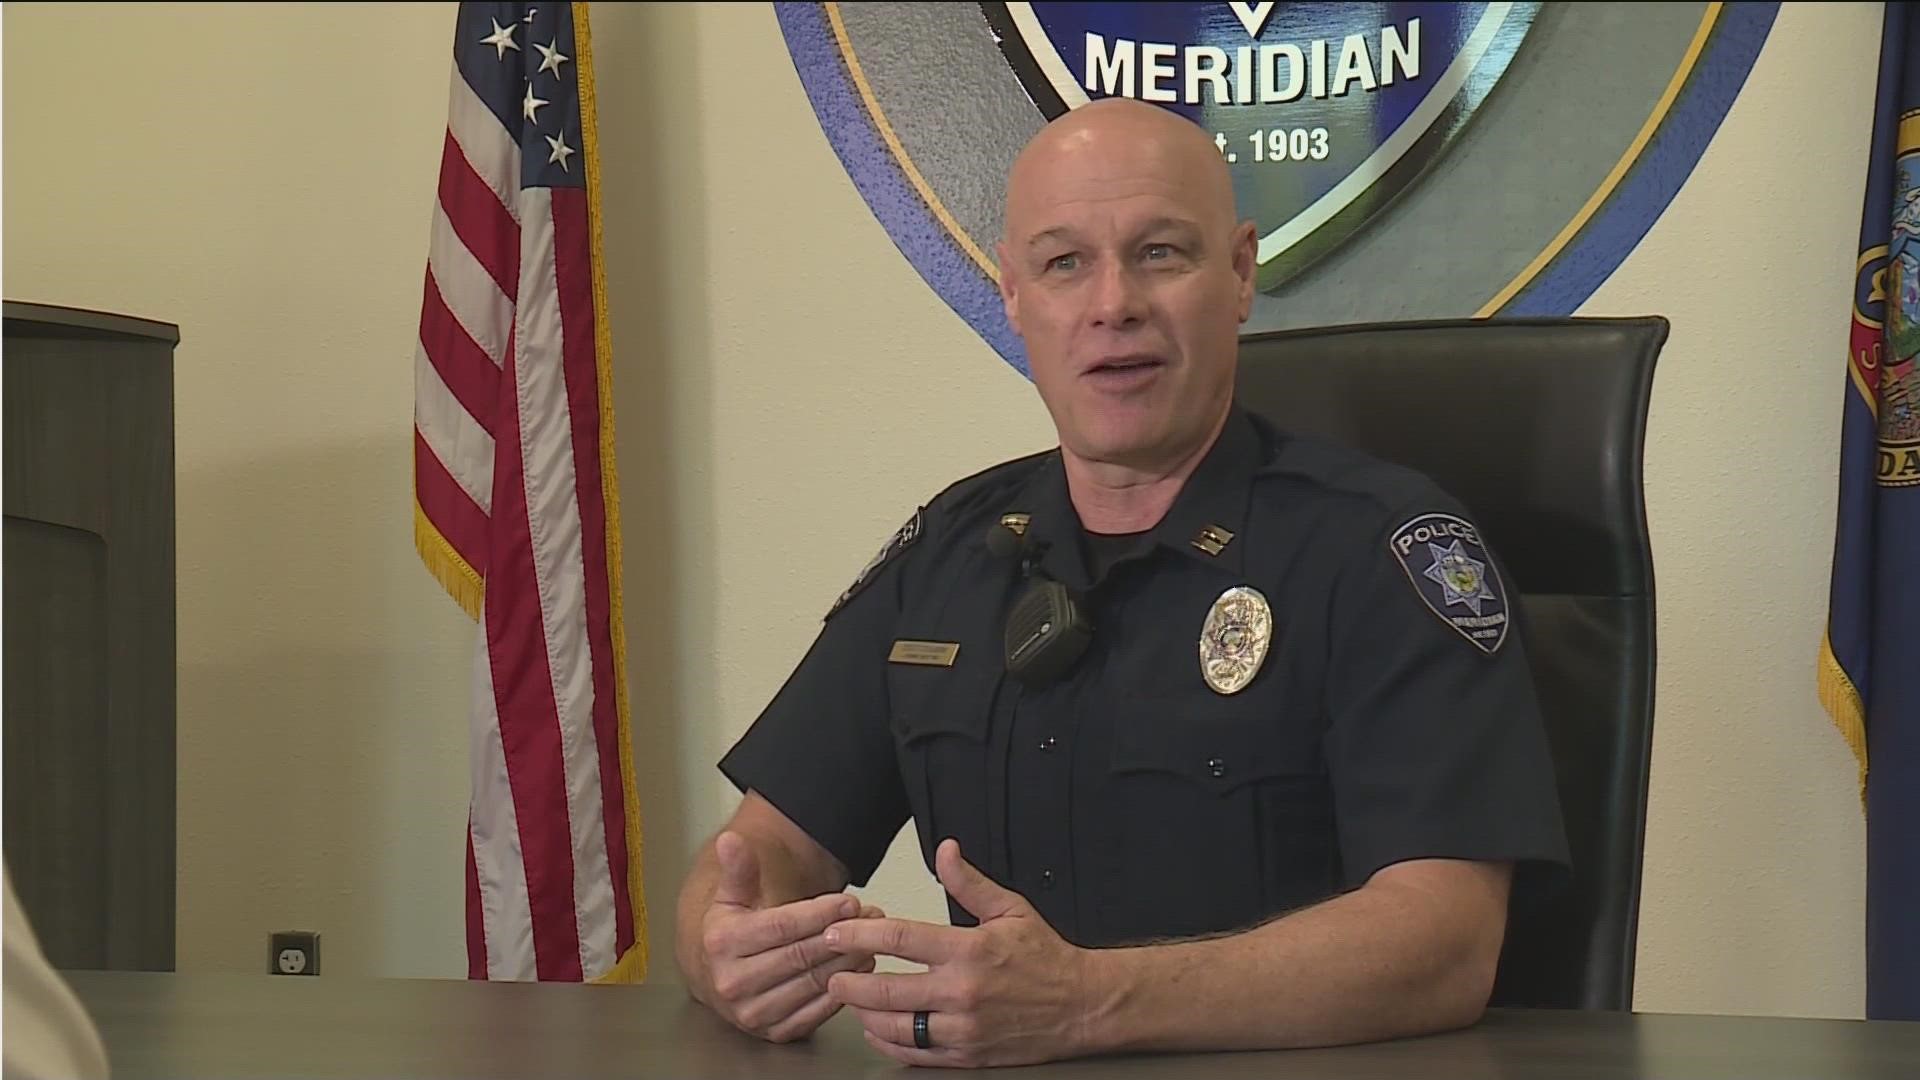 “I think we've seen a whole shift in the culture actually in law enforcement. Six years ago, it wasn't a problem hiring people,” said Nampa Police Chief Joe Huff.